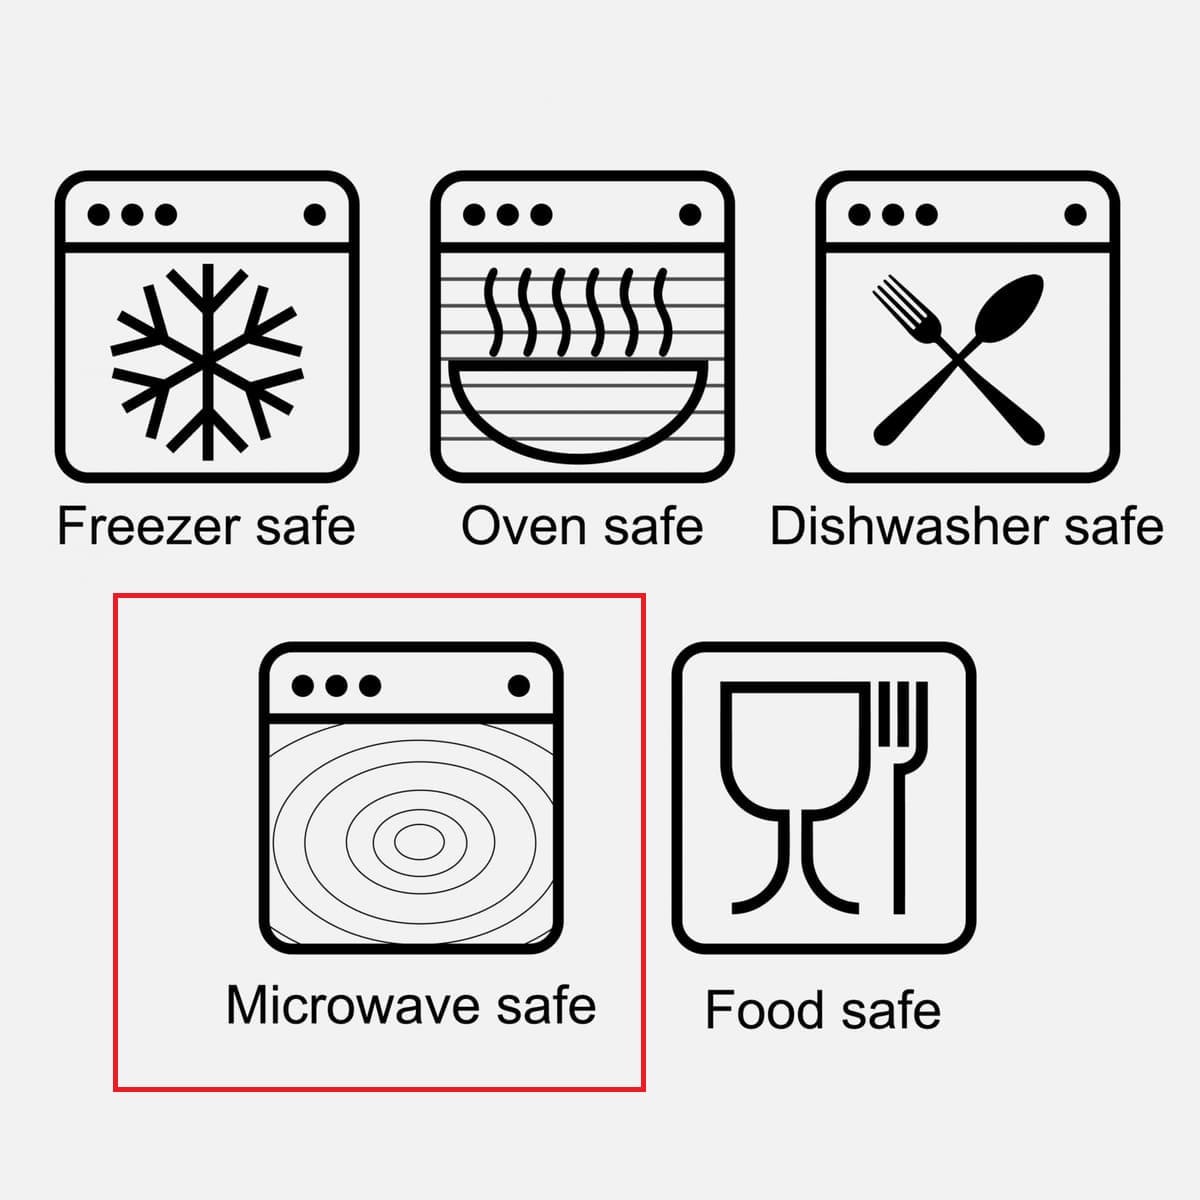 what does the microwave safe symbol look like